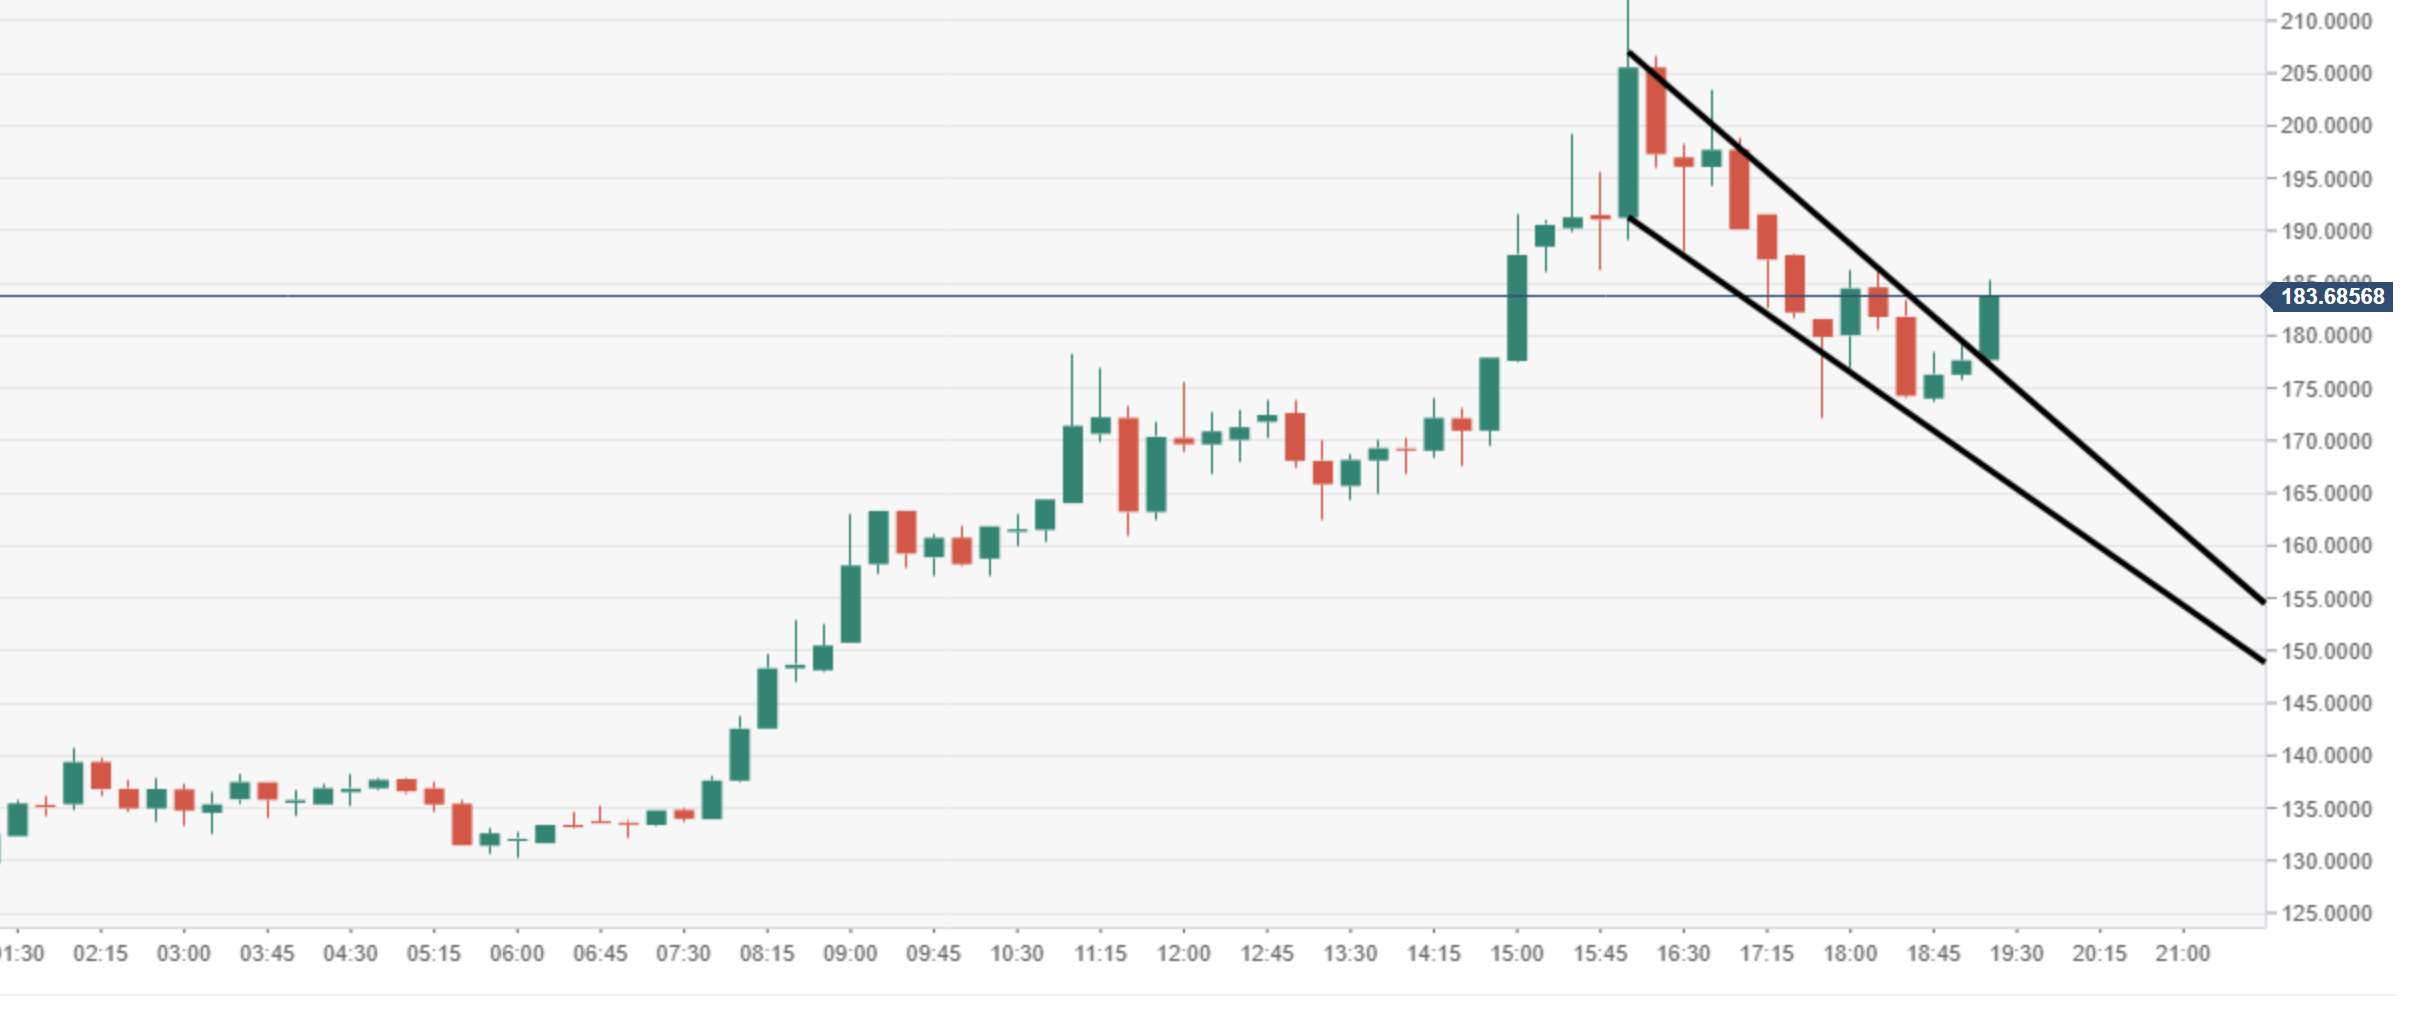 Bitcoin Cash Technical Analysis Bch Usd Jumps 76 In The Session - 